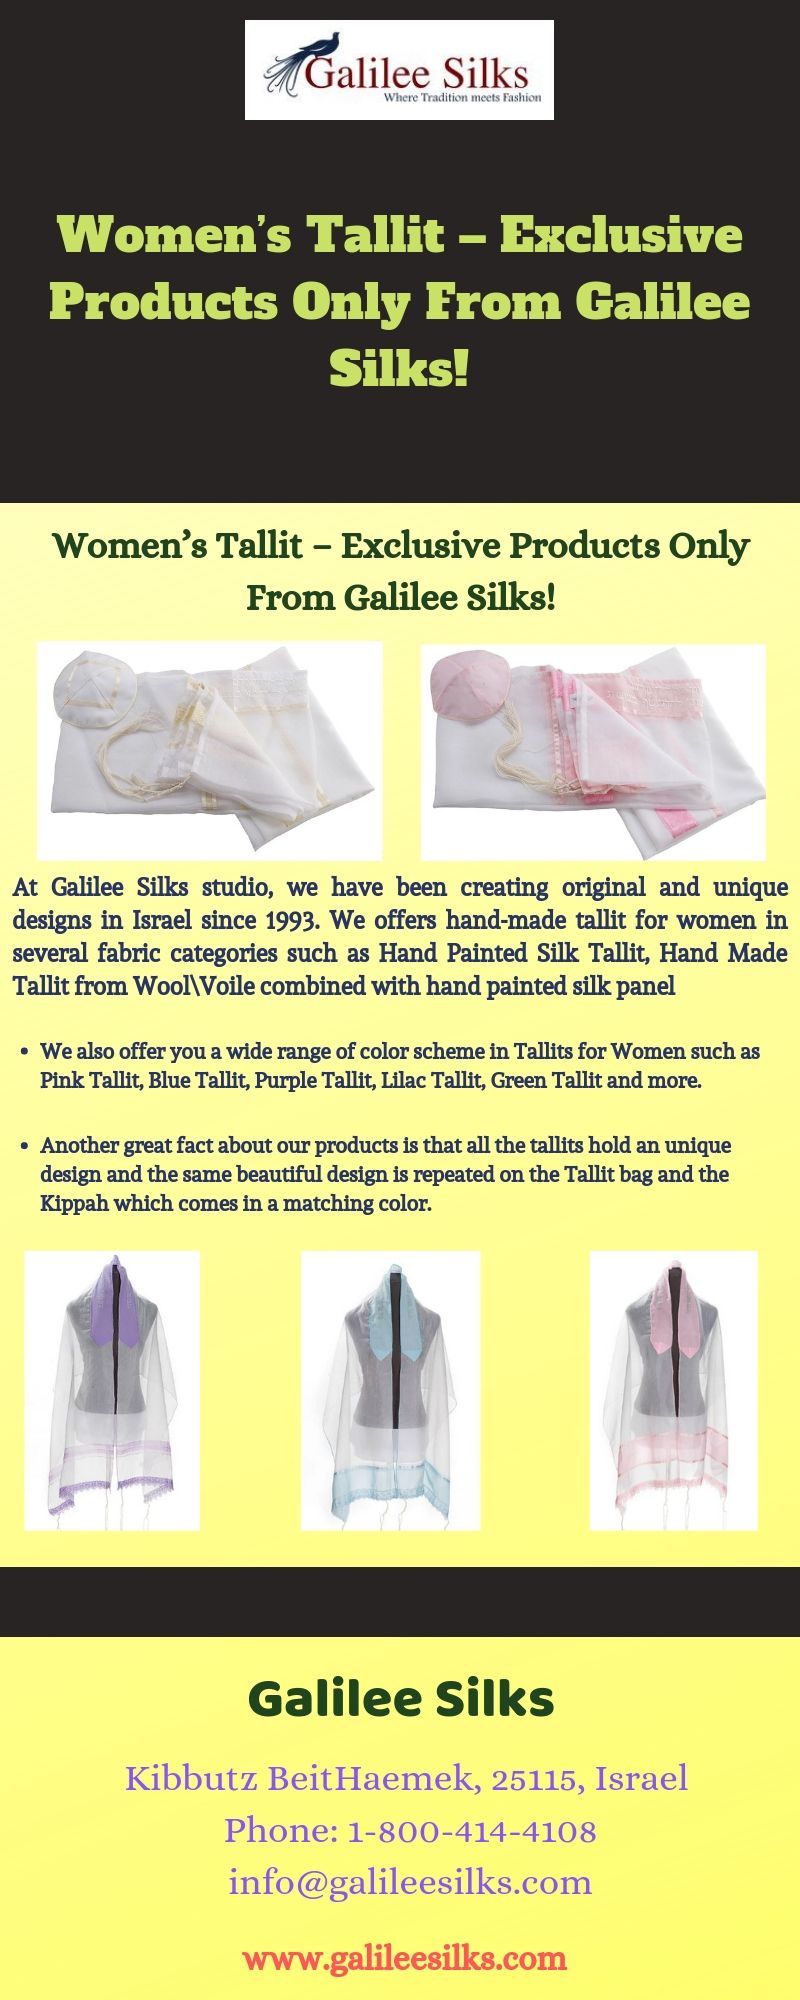 Women’s Tallit – Exclusive Products Only From Galilee Silks! There was a time when women were not allowed to wear tallit. Today, it has gained a lot of popularity. For more details, visit this link: https://bit.ly/346y4AM
 by amramrafi